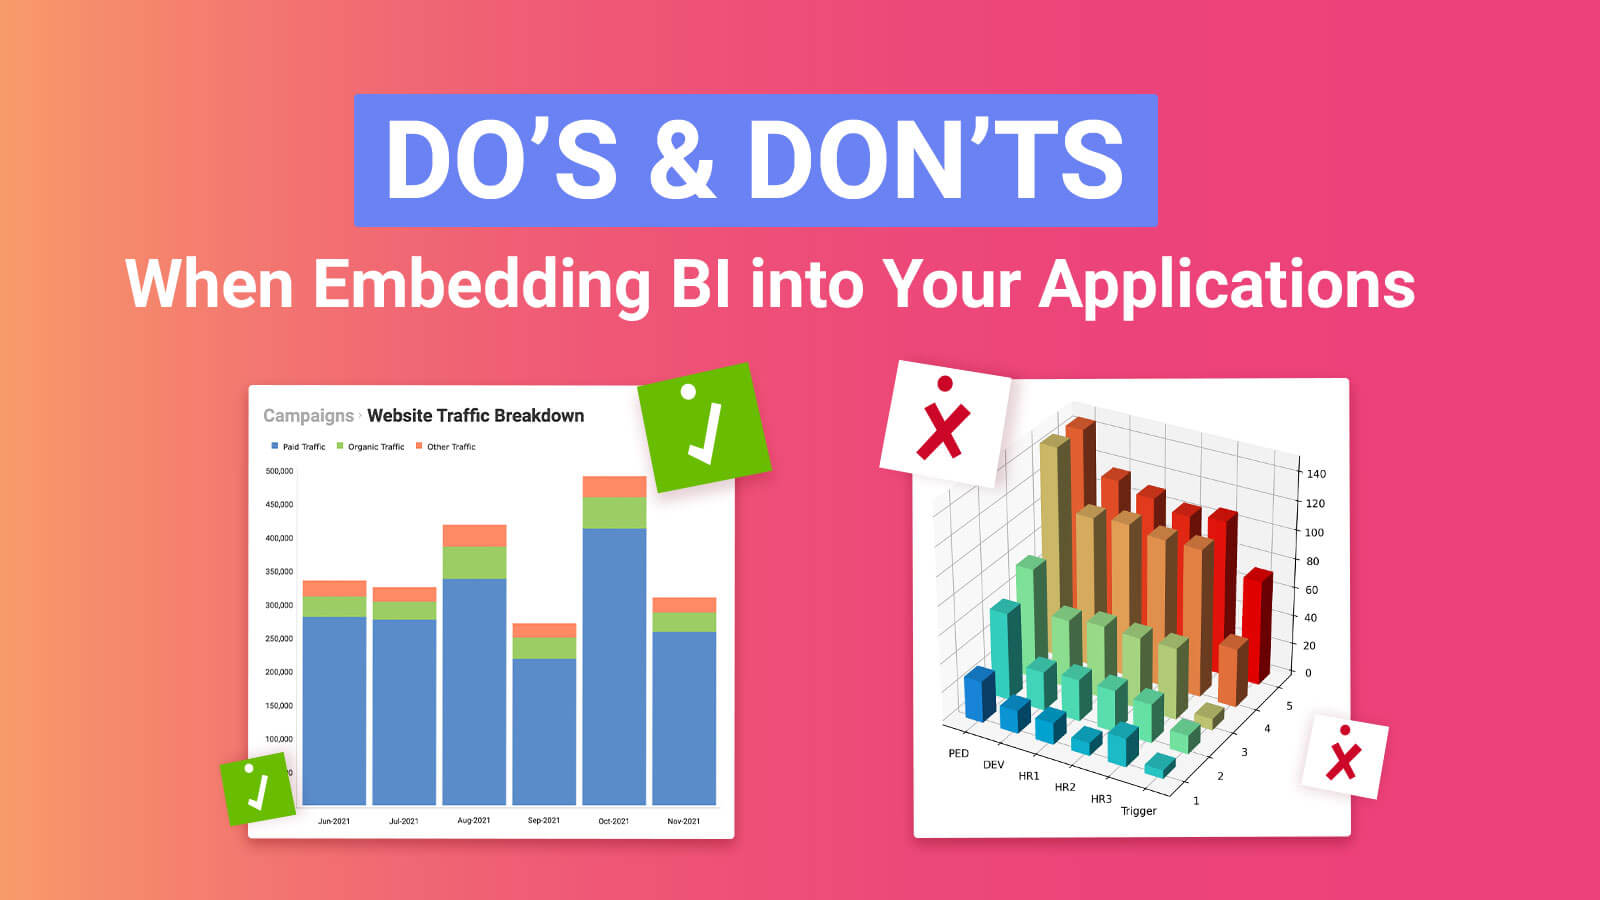 Do's and Don'ts When Embedding BI into Your Applications